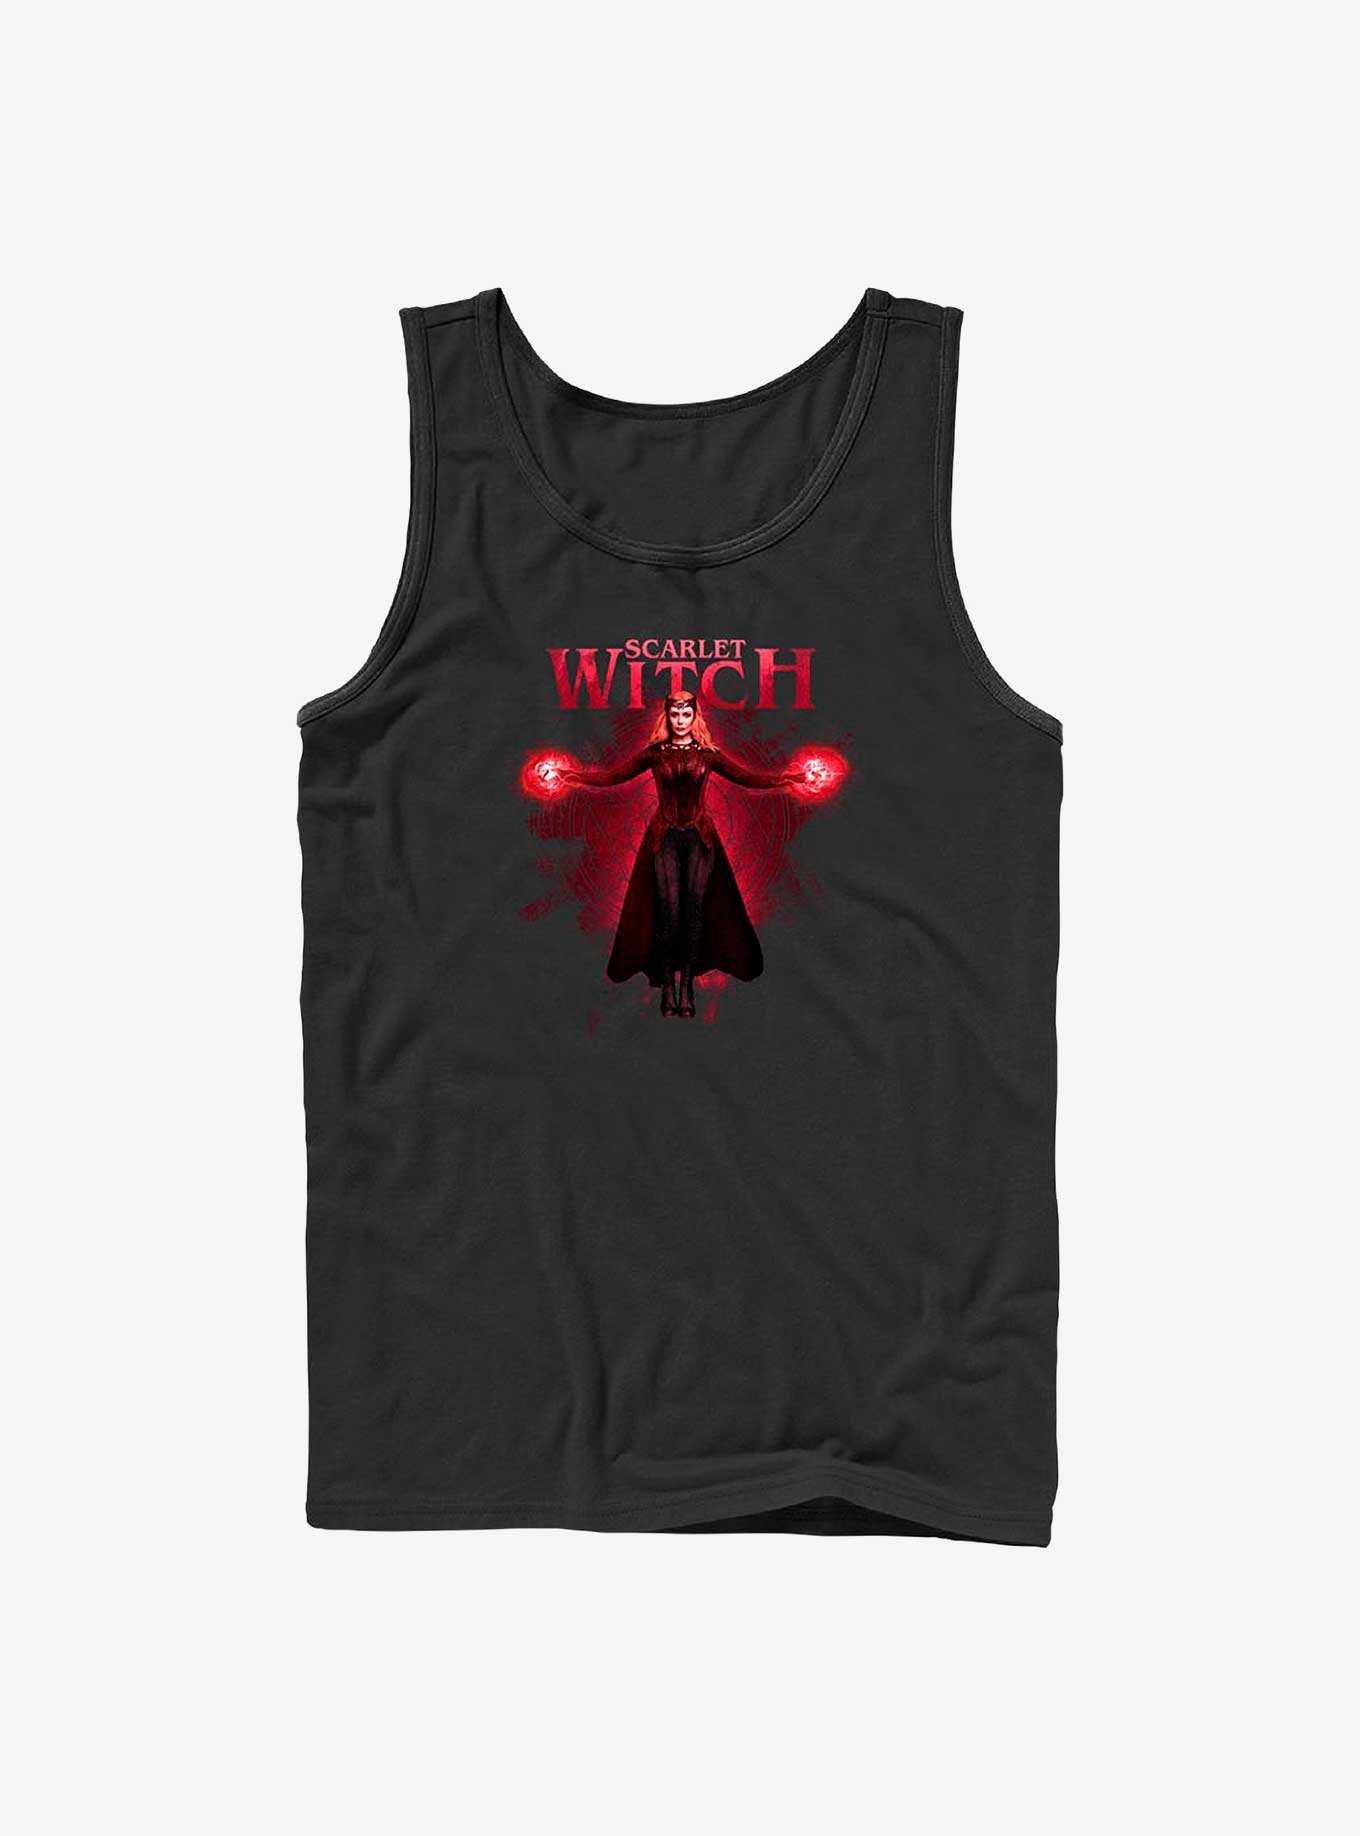 Marvel Doctor Strange in the Multiverse of Madness Scarlet Witch Tank, , hi-res